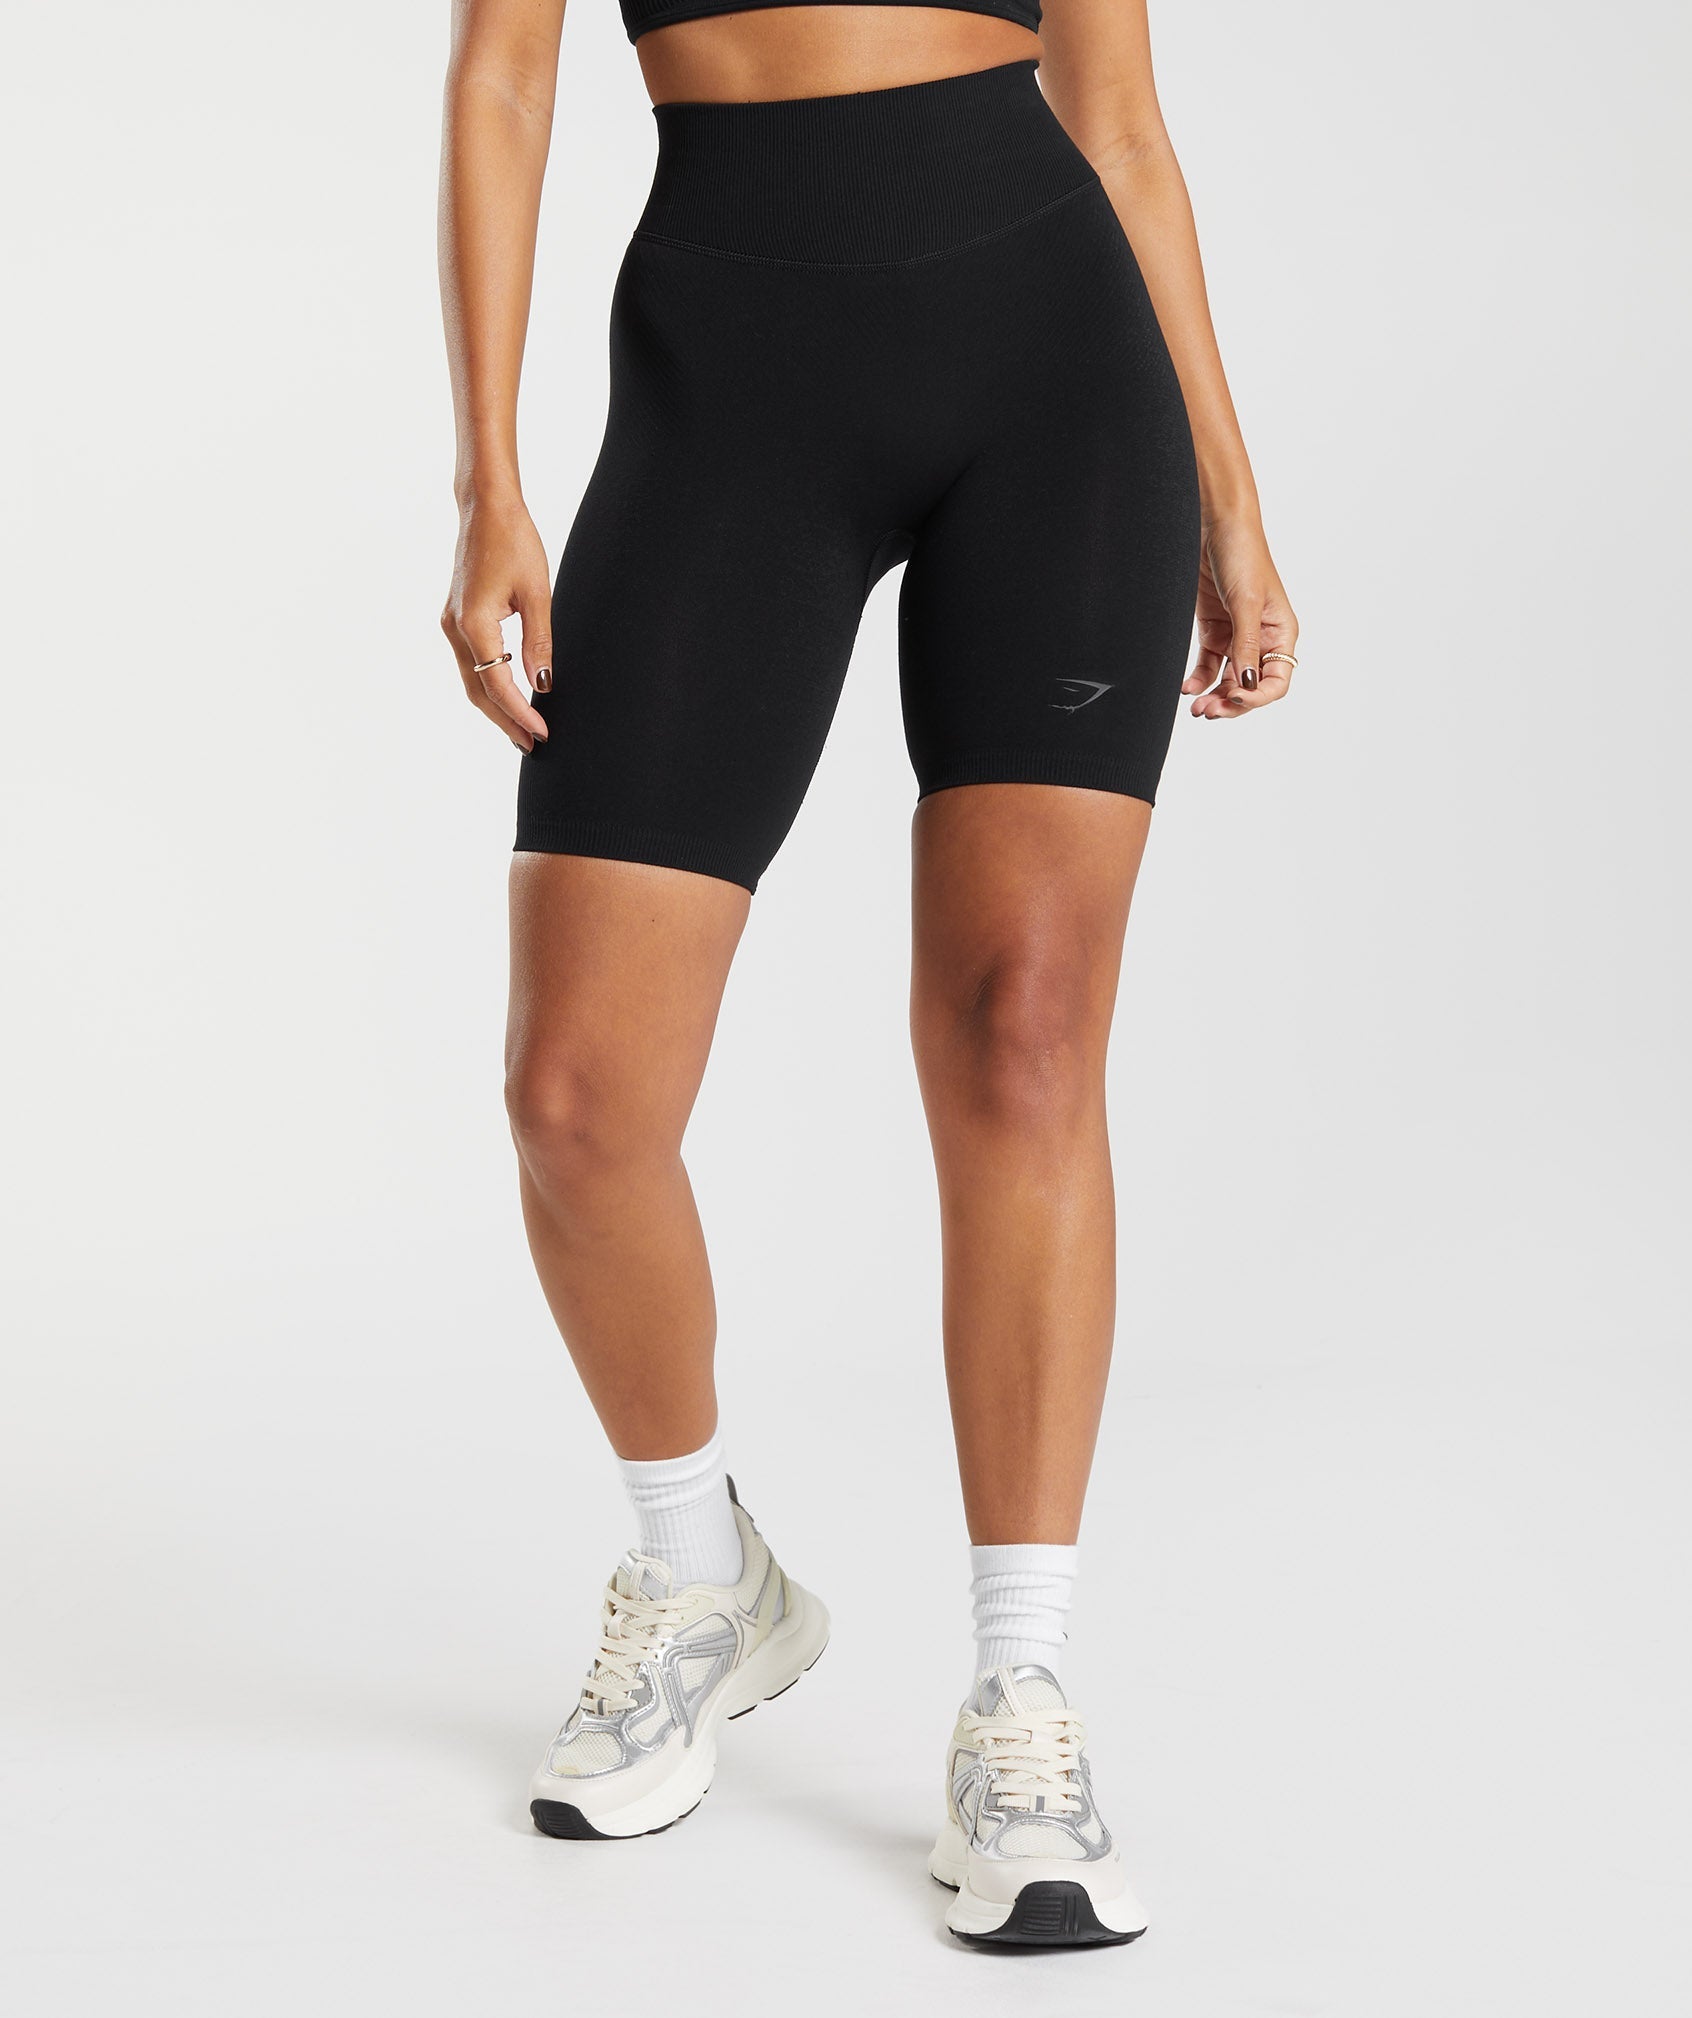 Rest Day Seamless Cycling Shorts